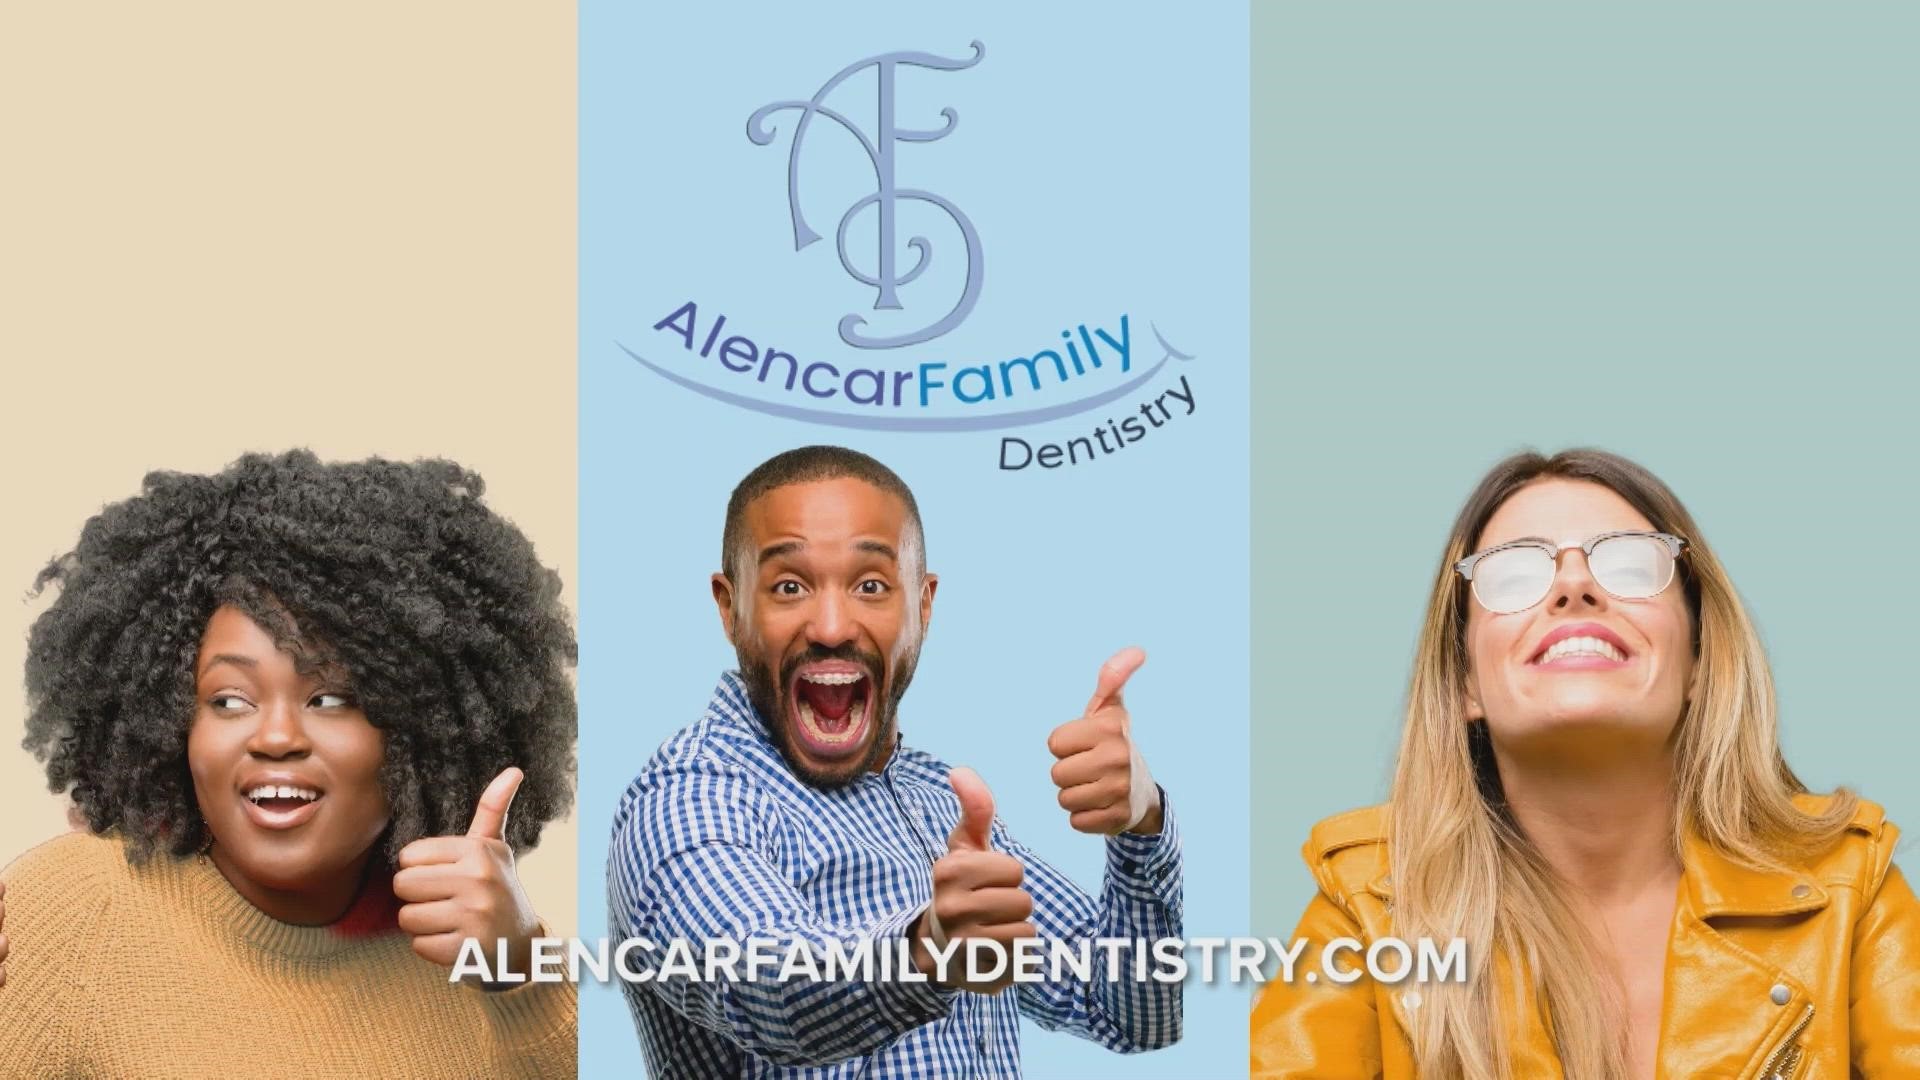 Alencar Family Dentistry os proudly serving Hampton Roads since 2017 with love and care for you and your family. All patients are welcomed.